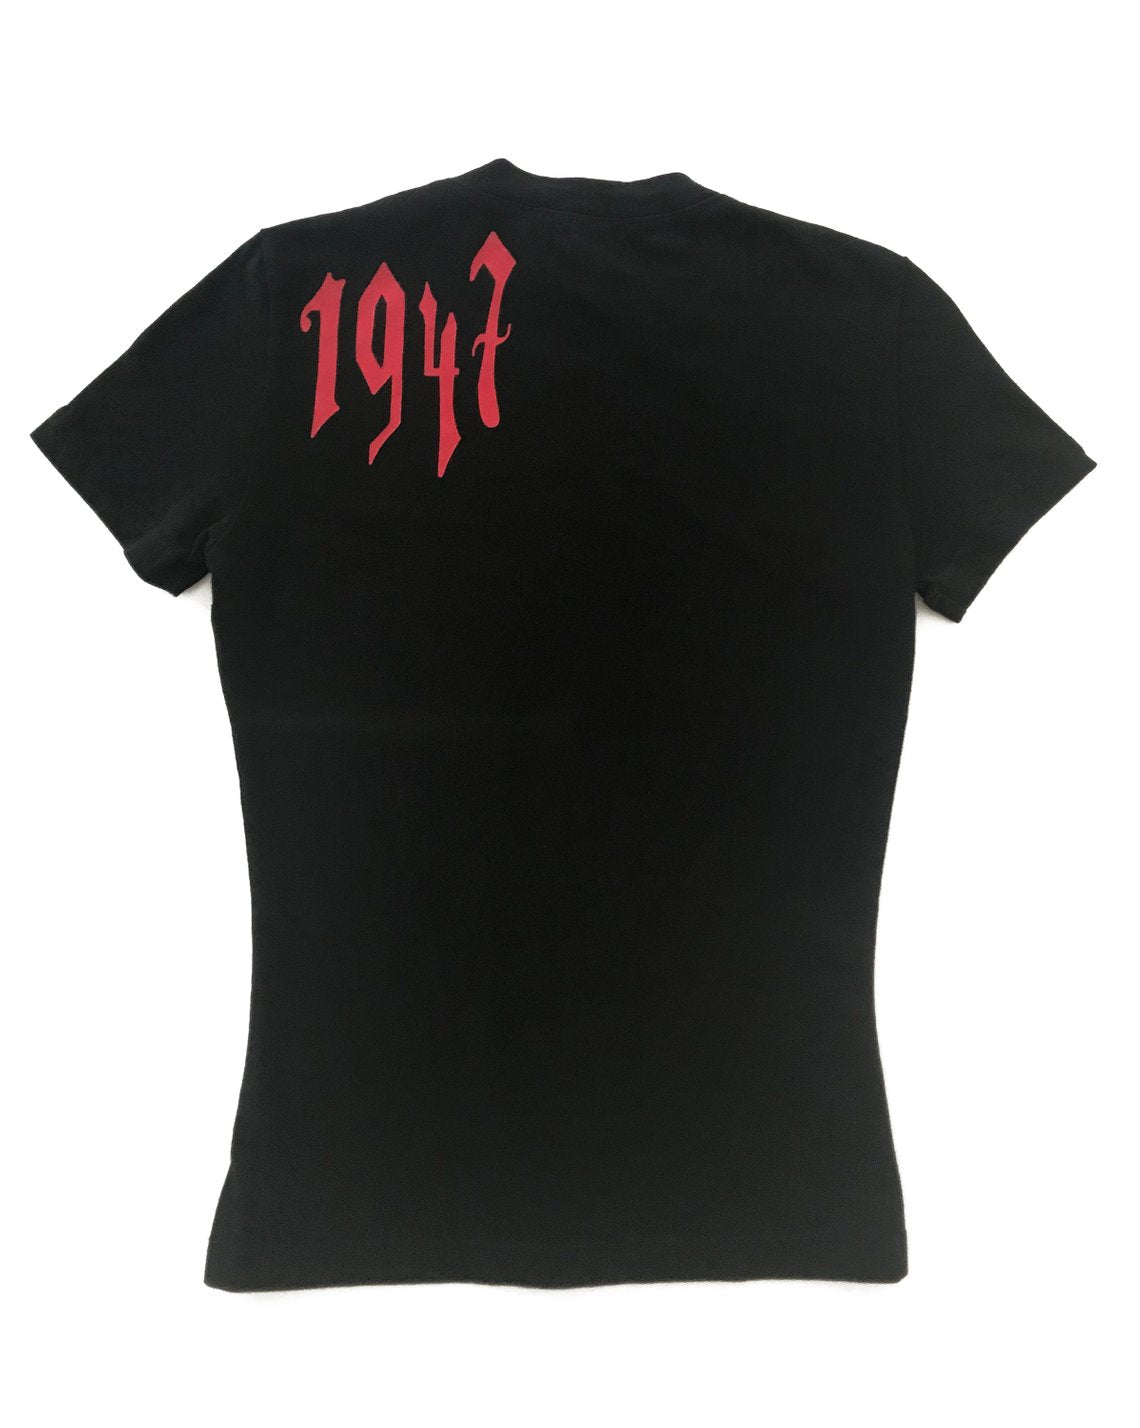 Fruit Vintage Christian Dior Gothic text Logo t-shirt. Features a classic t-shirt cut and graphic print with Christian Dior across the front and 1947 across the back.